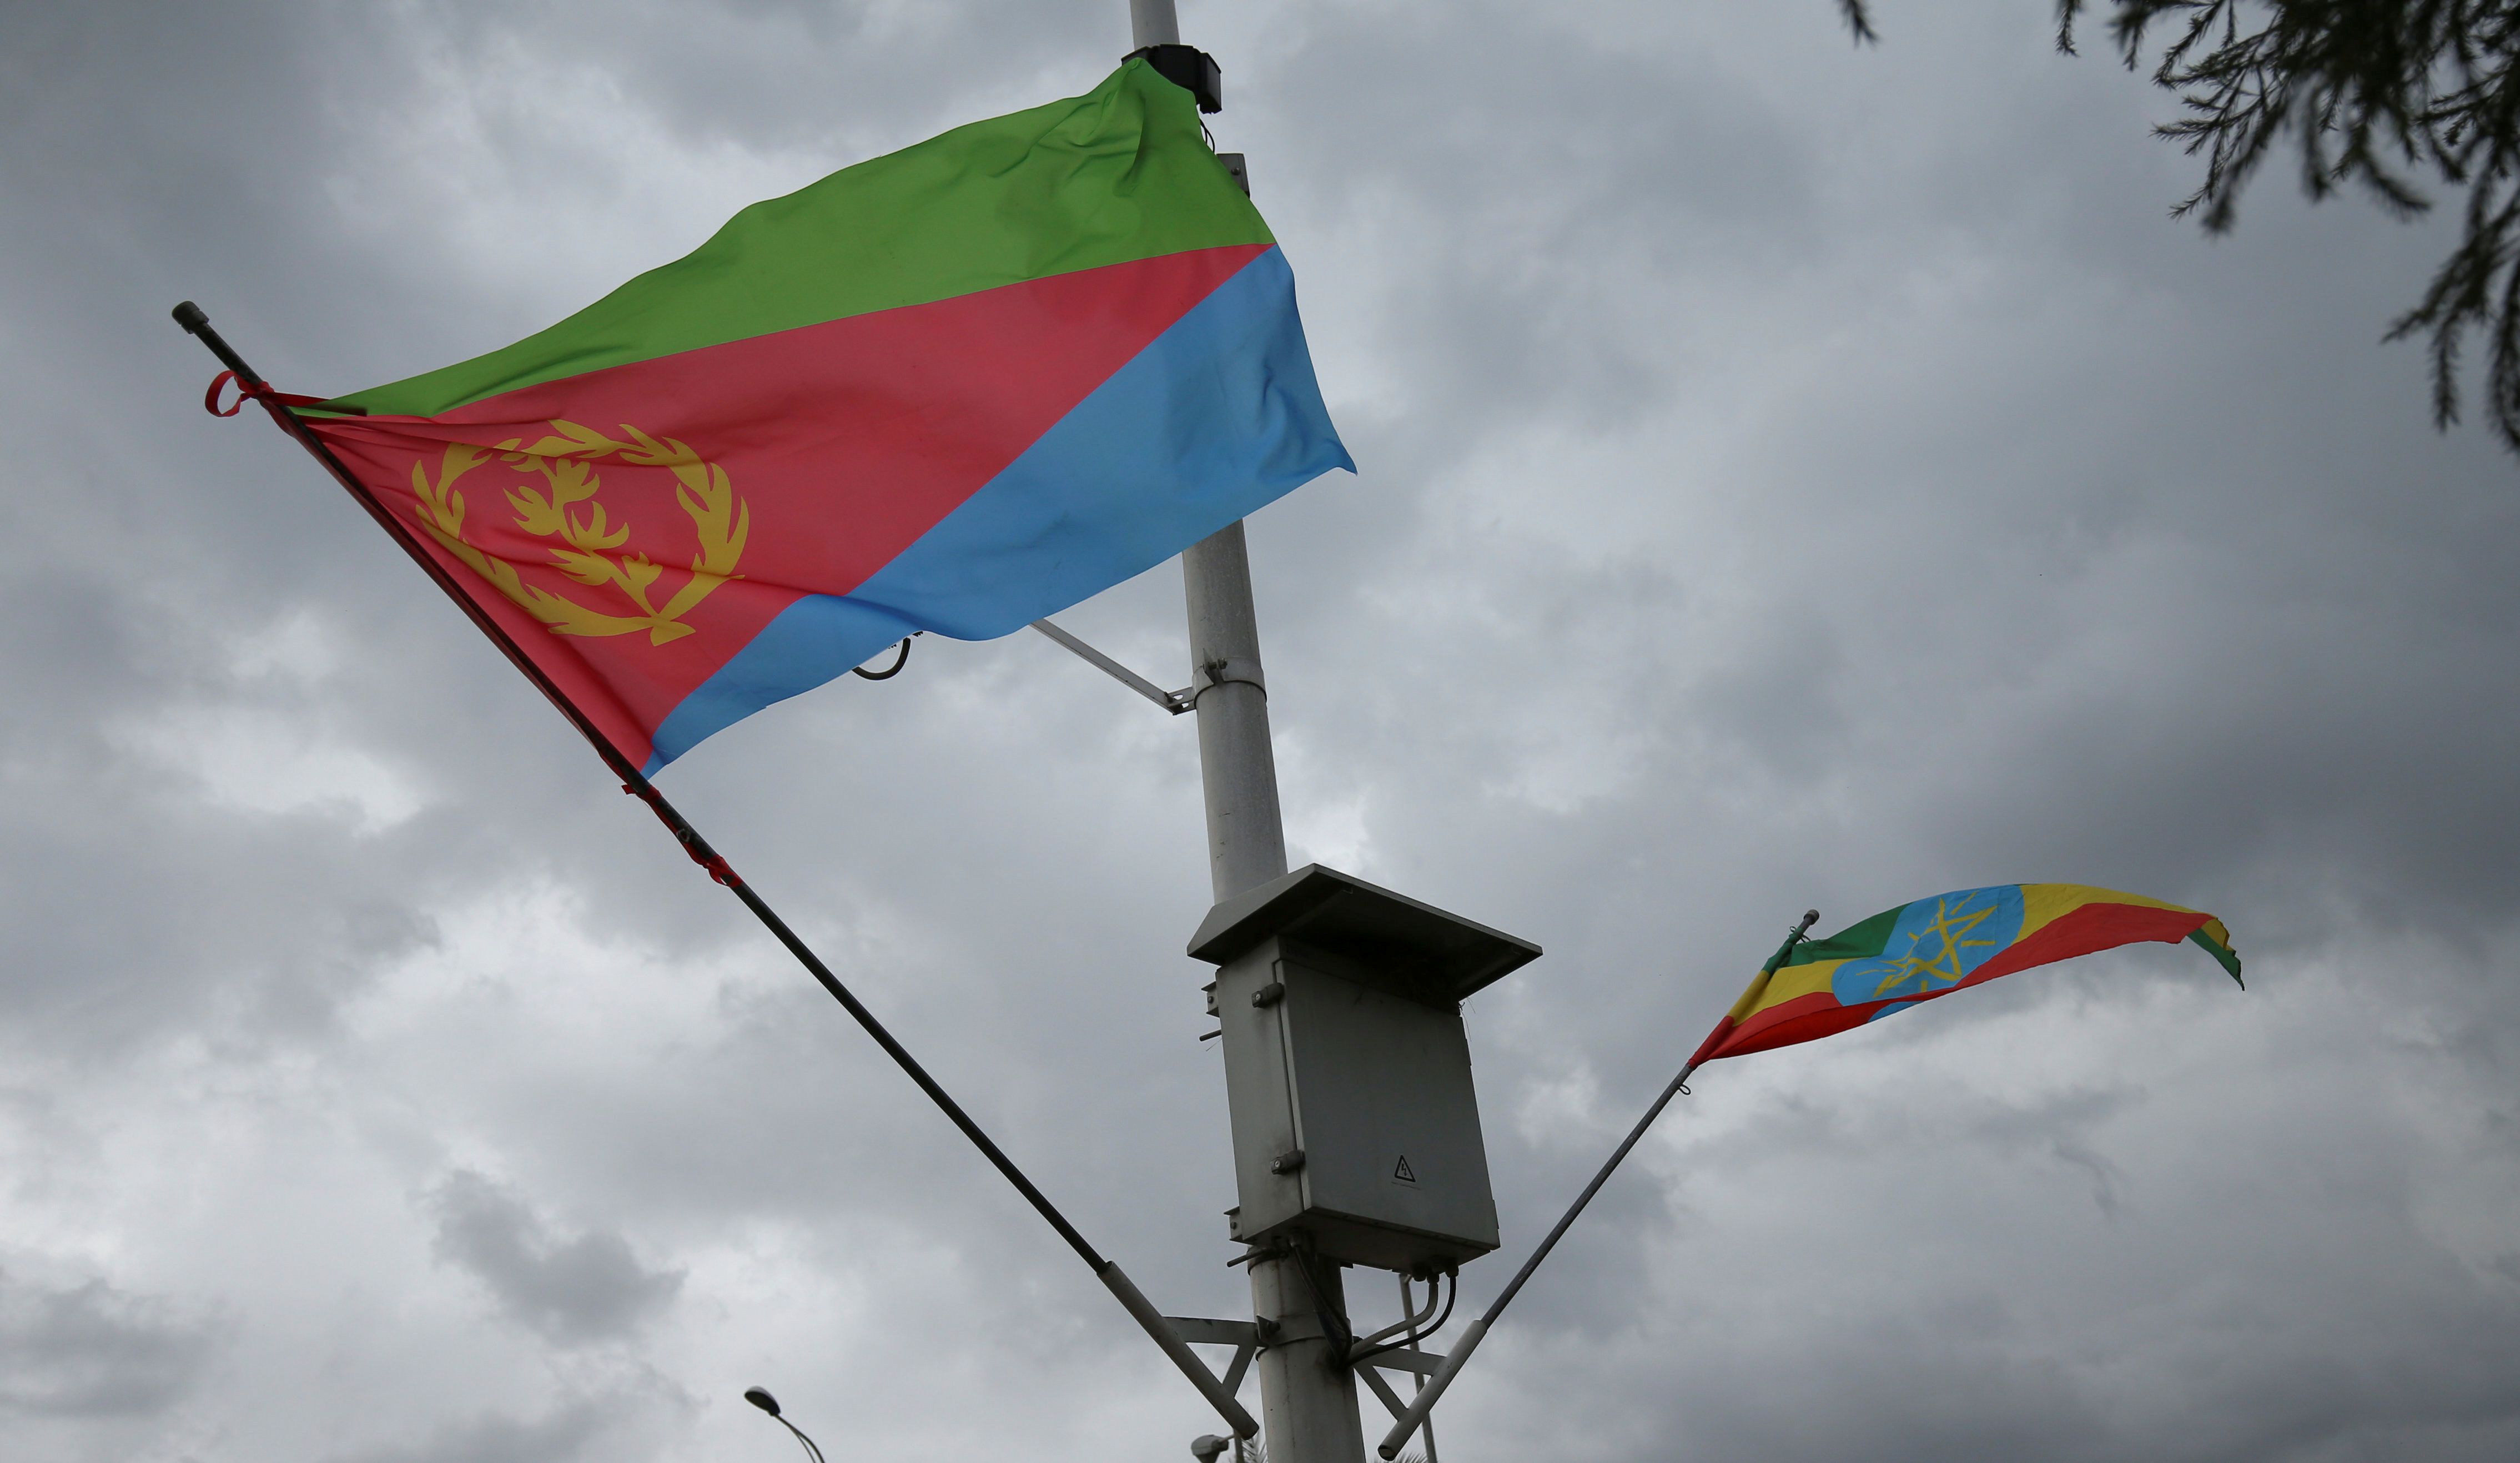 Church leaders urge Eritrean government to improve human rights